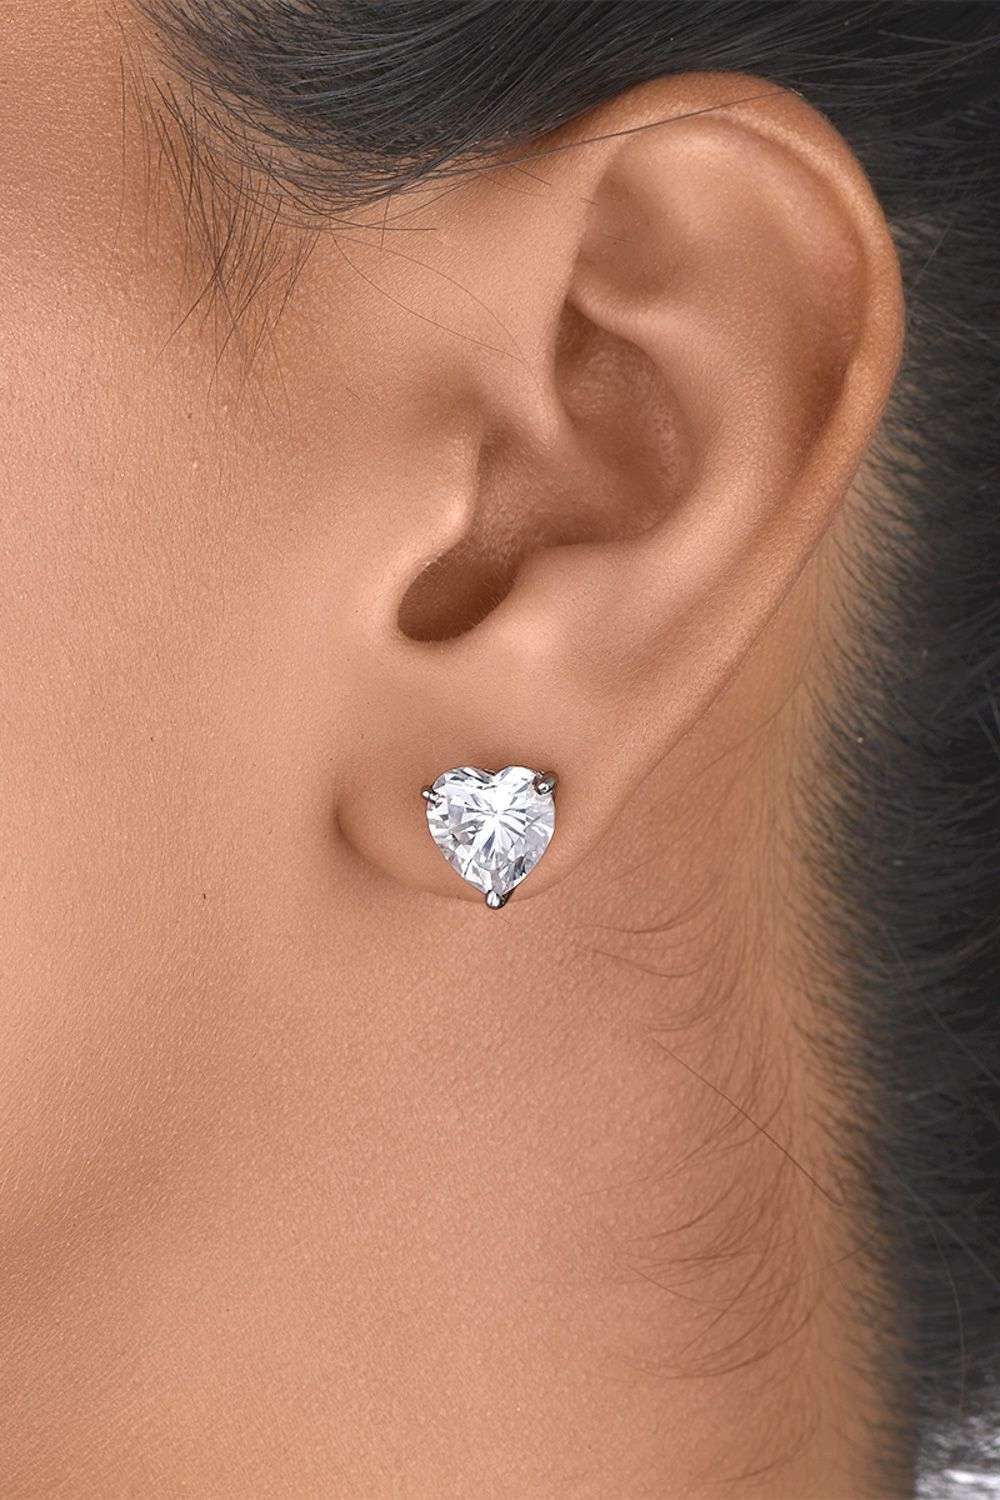 Solitaire Earrings embellished with Swarovski Zirconia – HighSpark